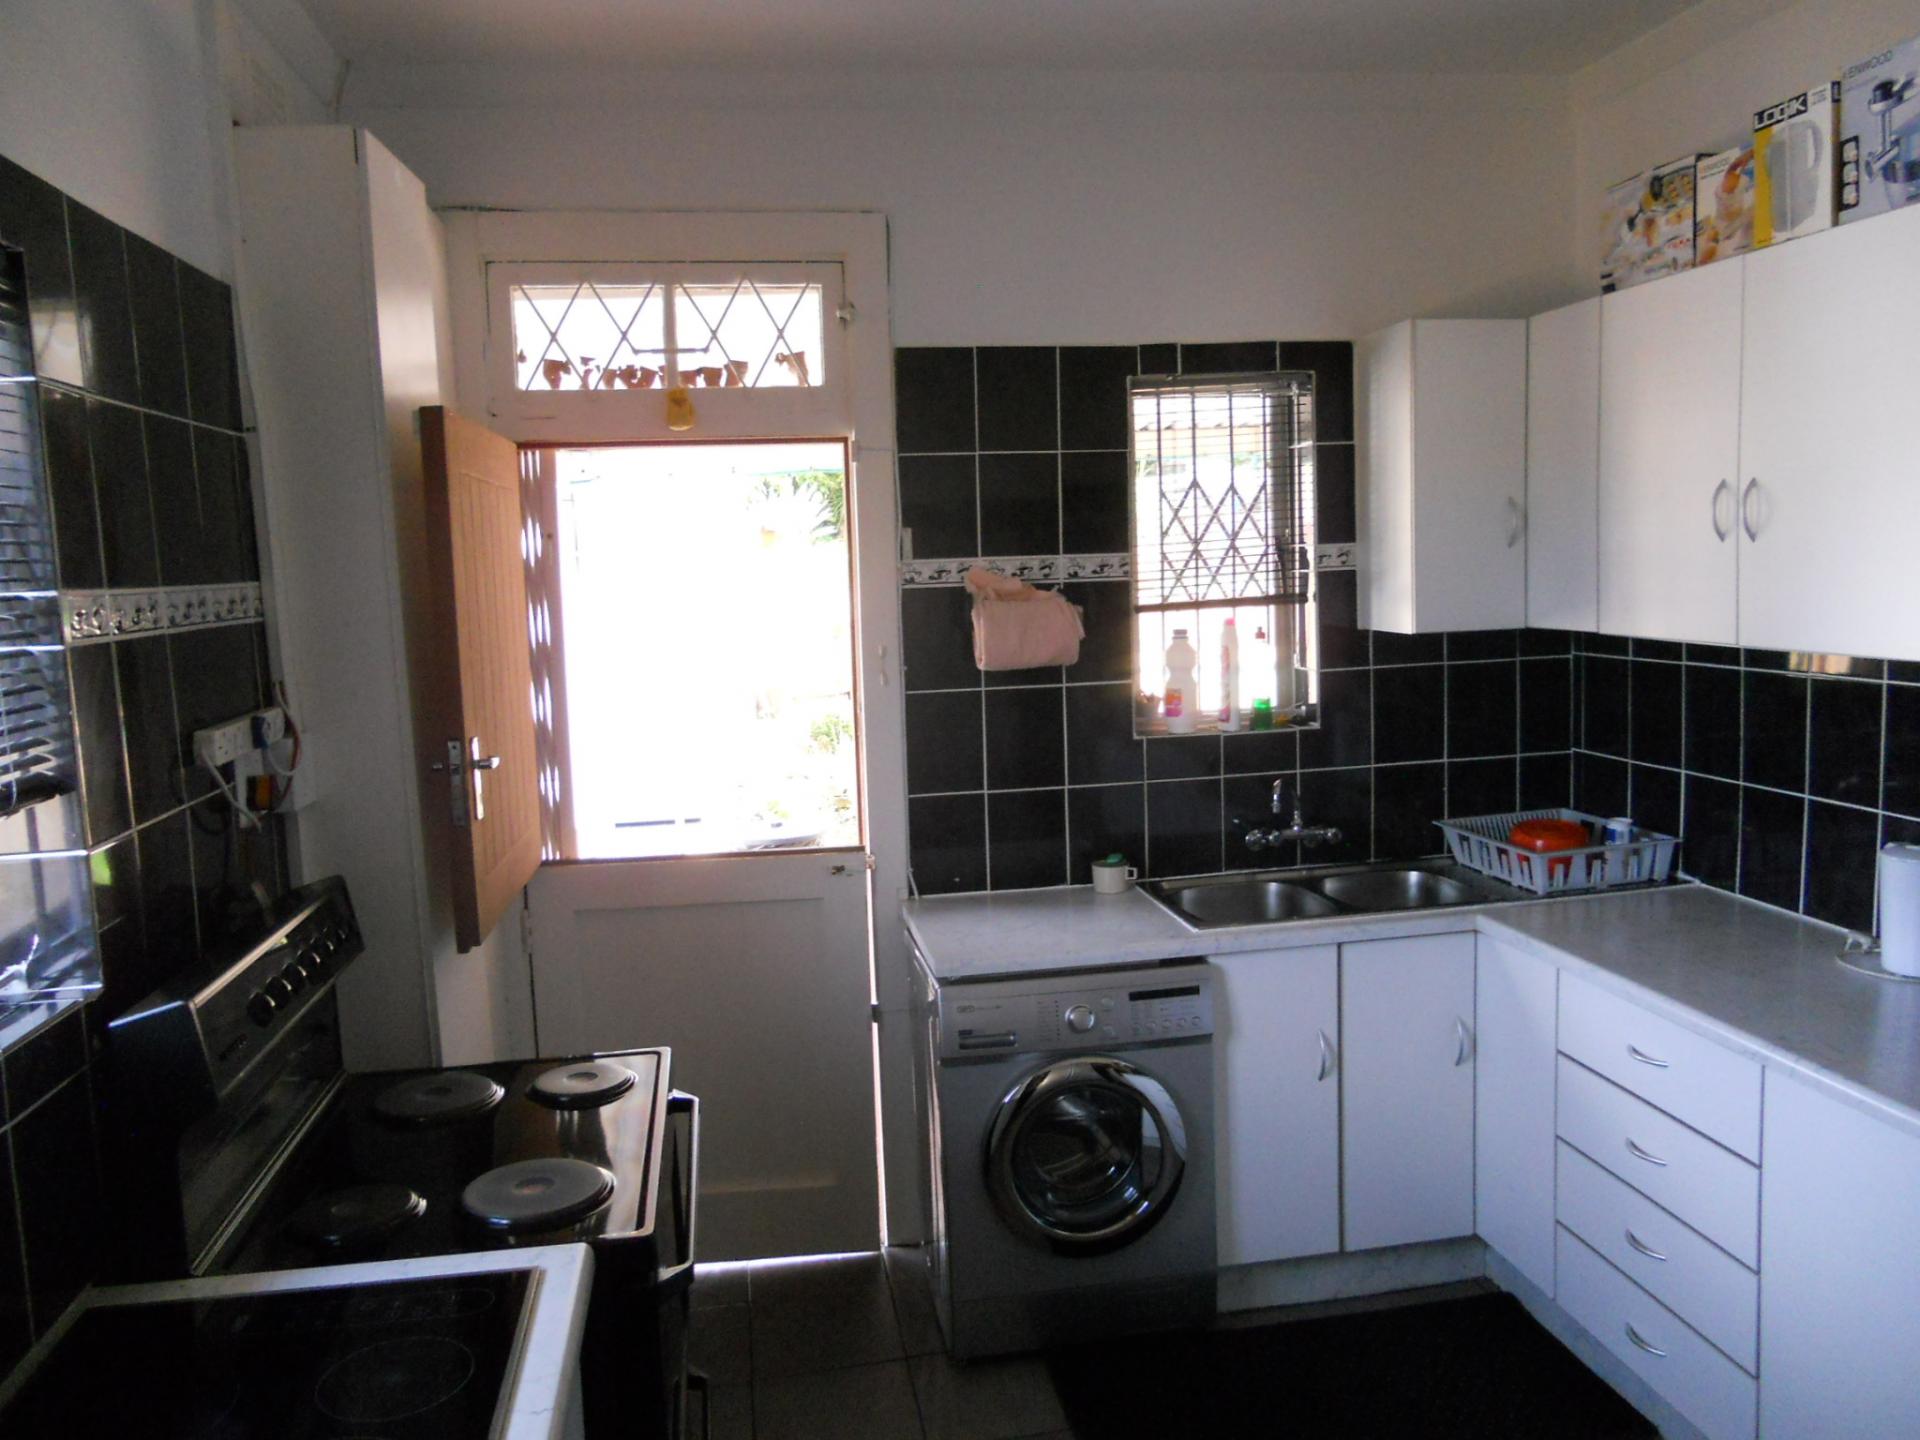 Kitchen - 14 square meters of property in Bellair - DBN